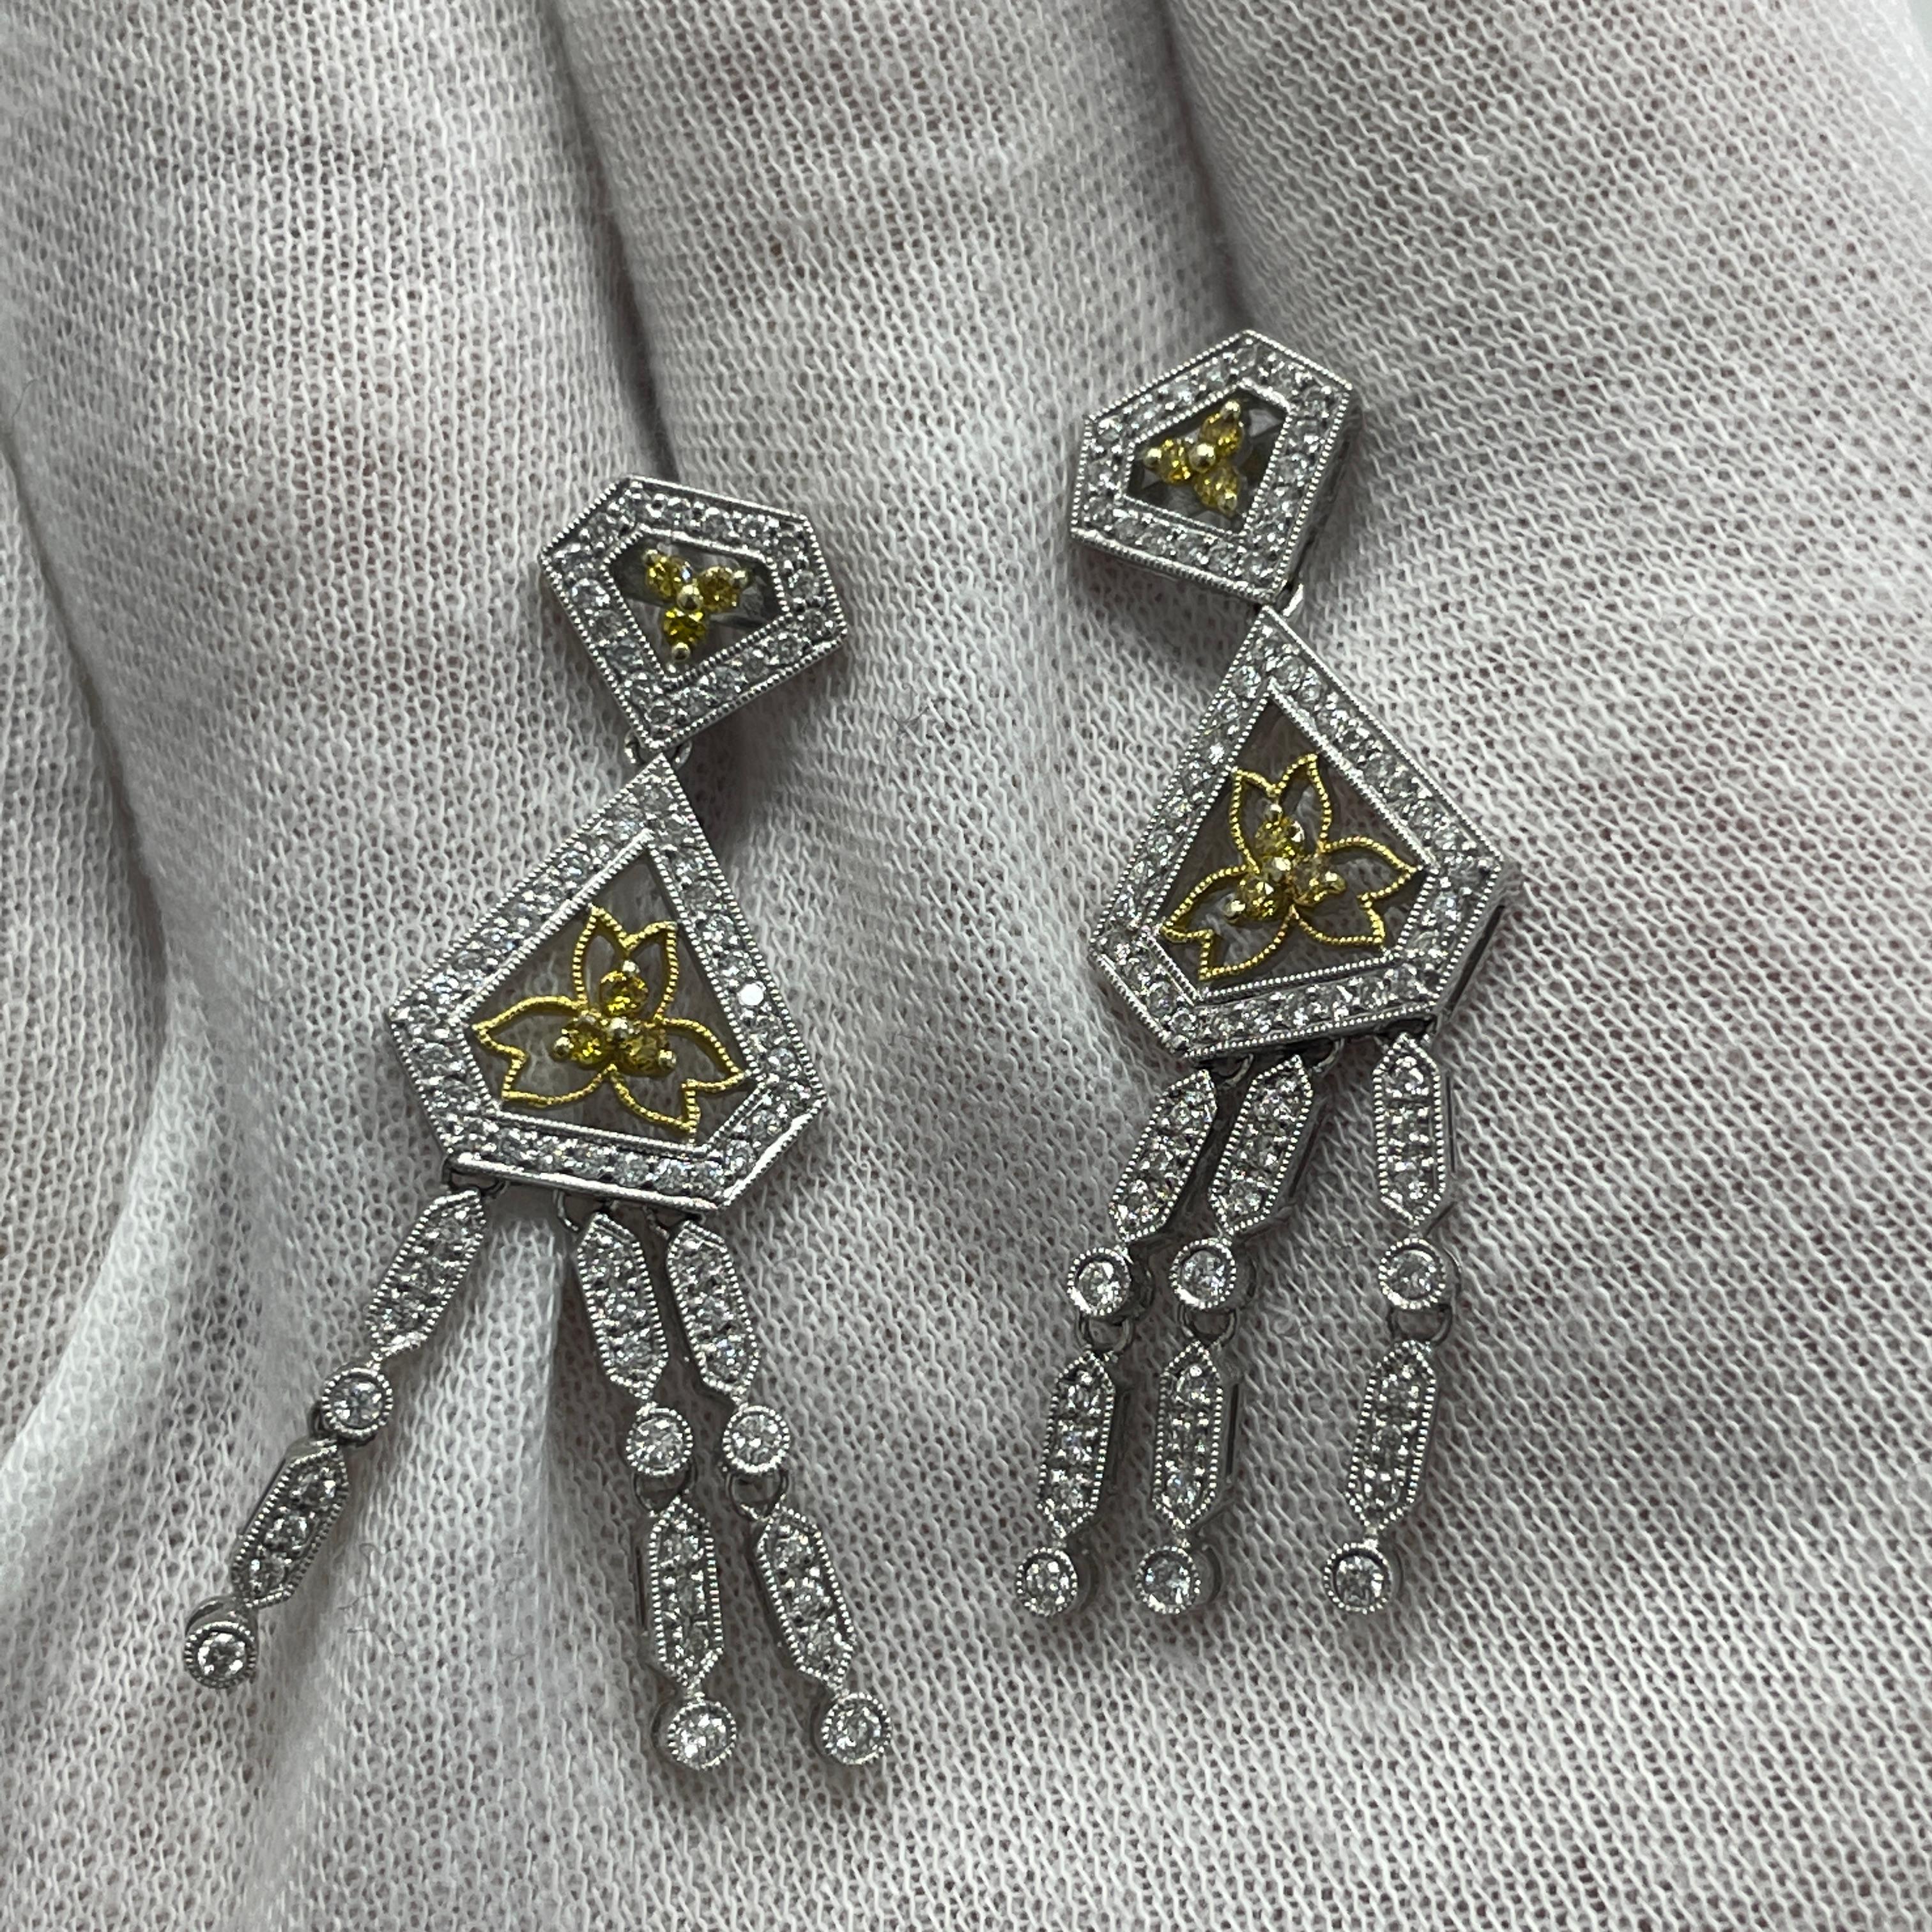 These elegant 18K white and yellow gold dangling earrings carry 0.84Ct of white diamonds and 0.17Ct of yellow diamonds